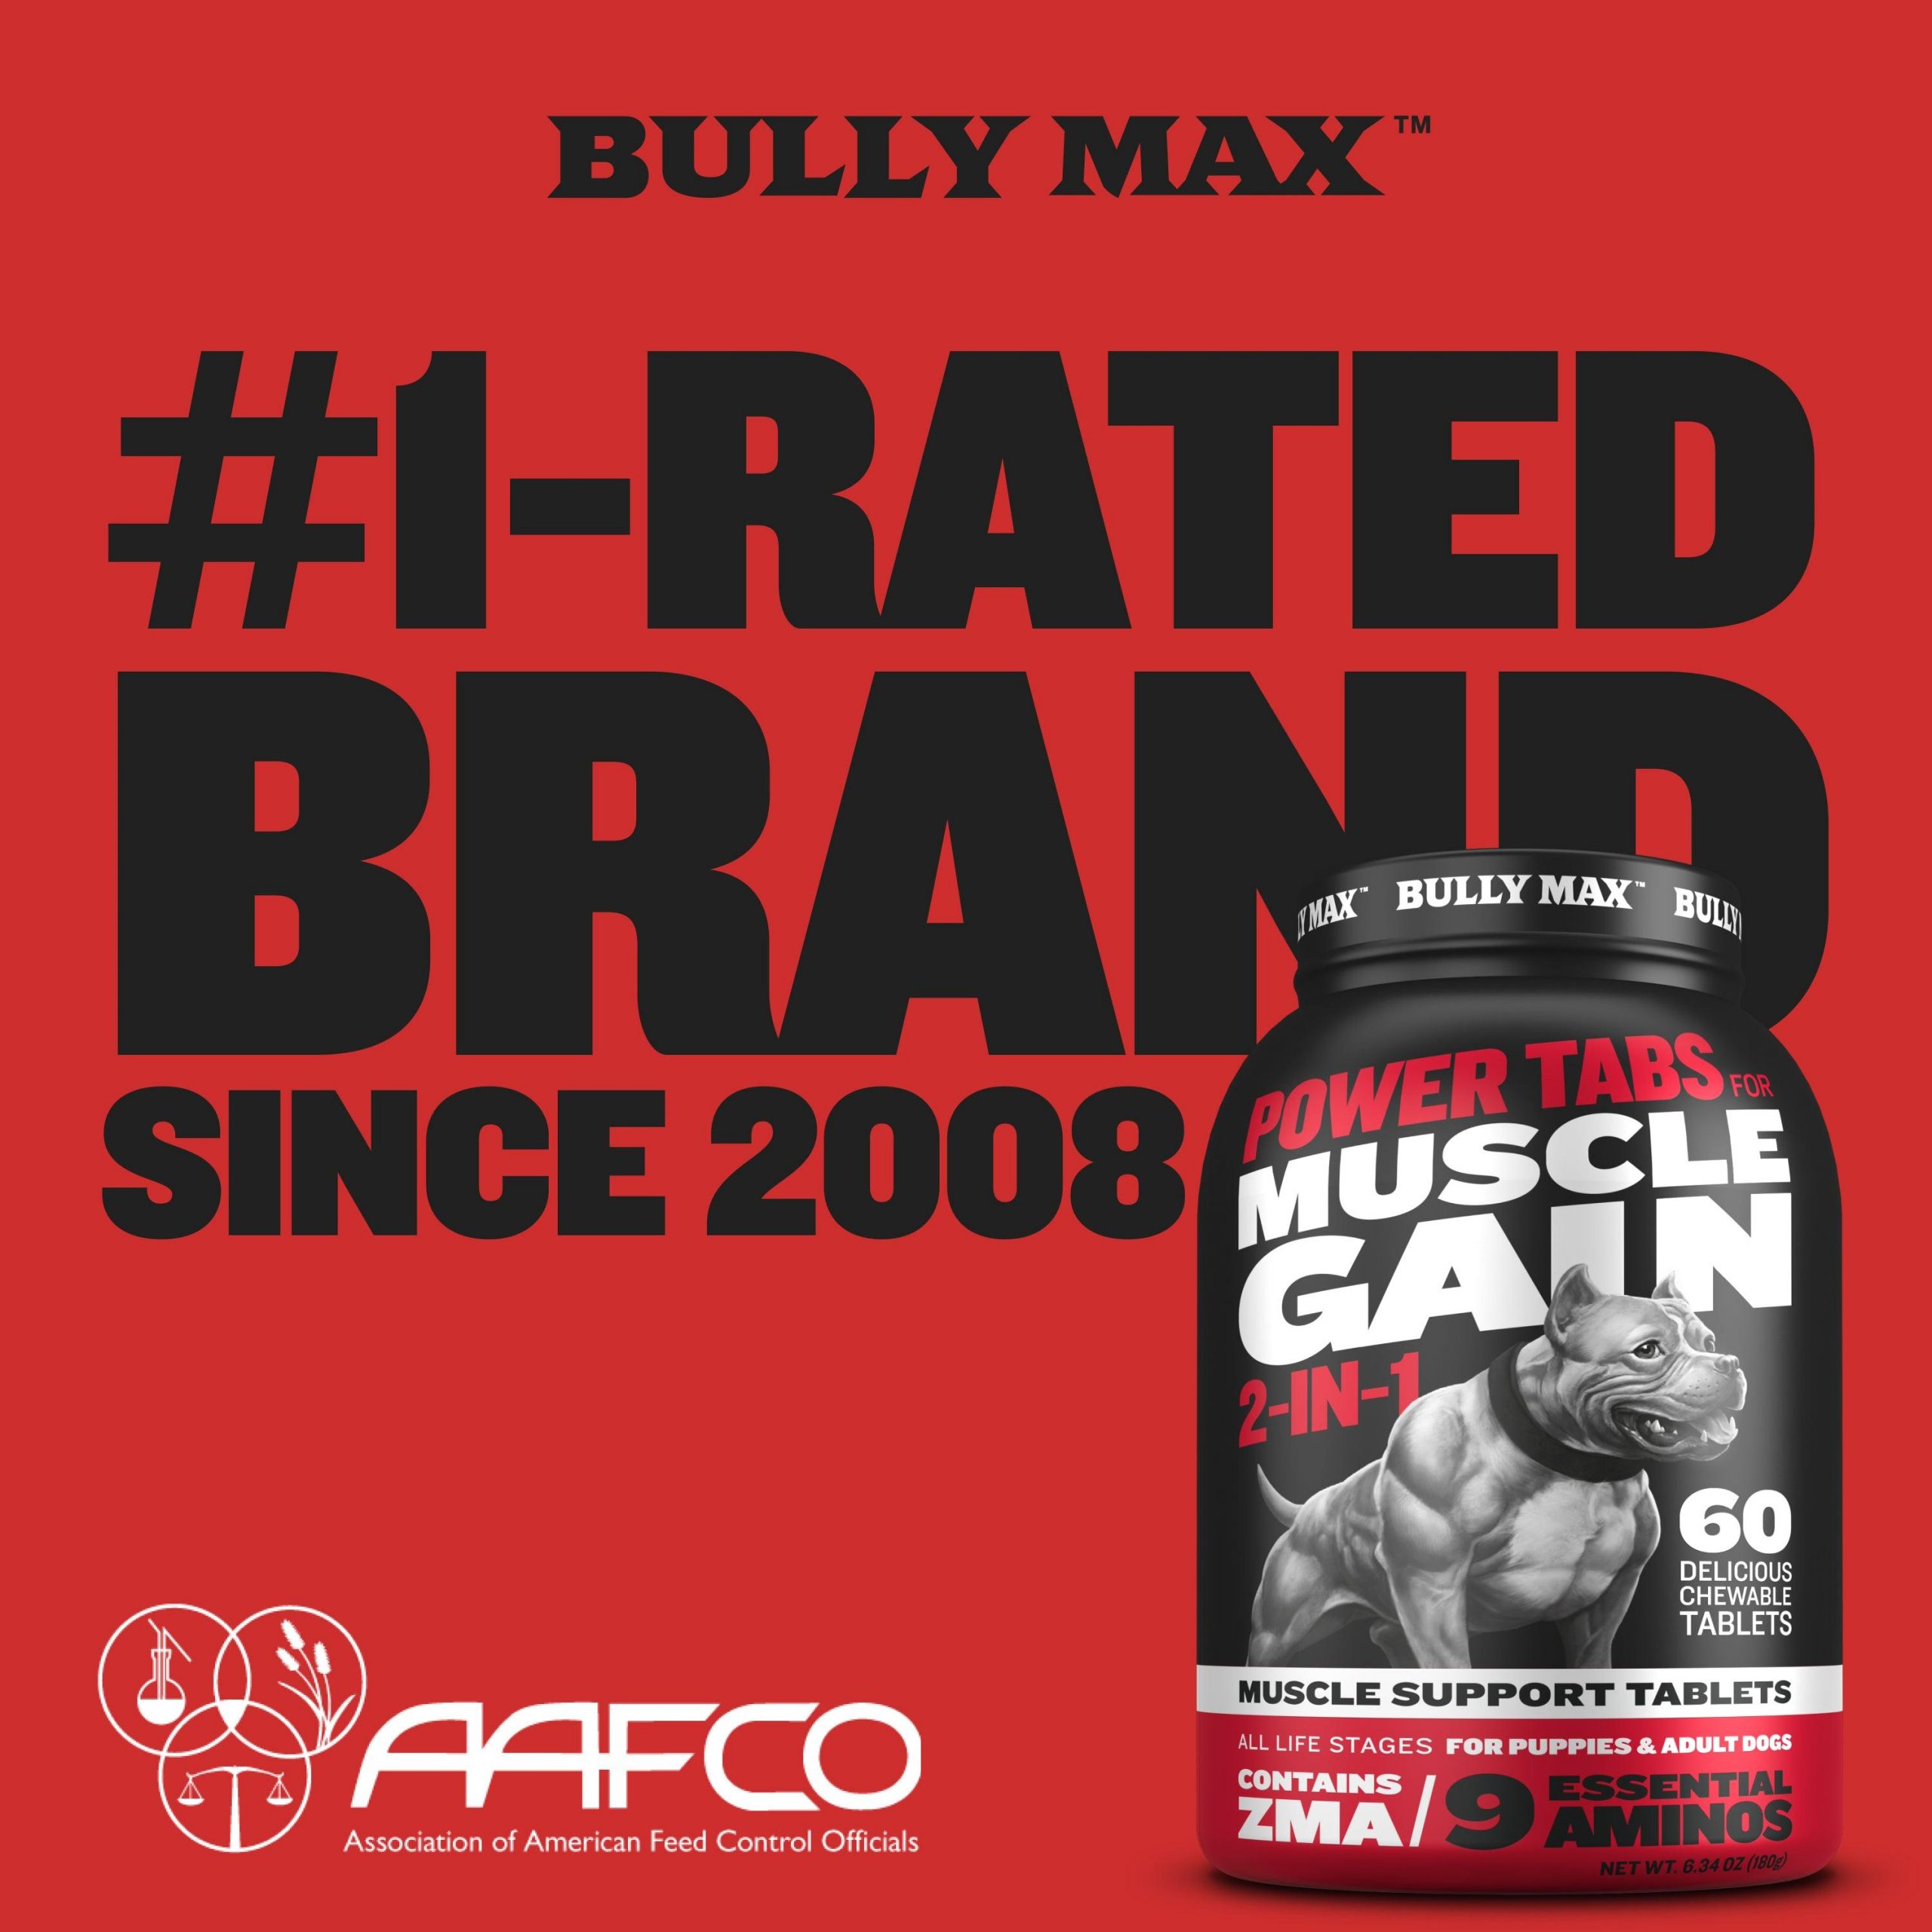 Bully Max Original Muscle Supplement 4